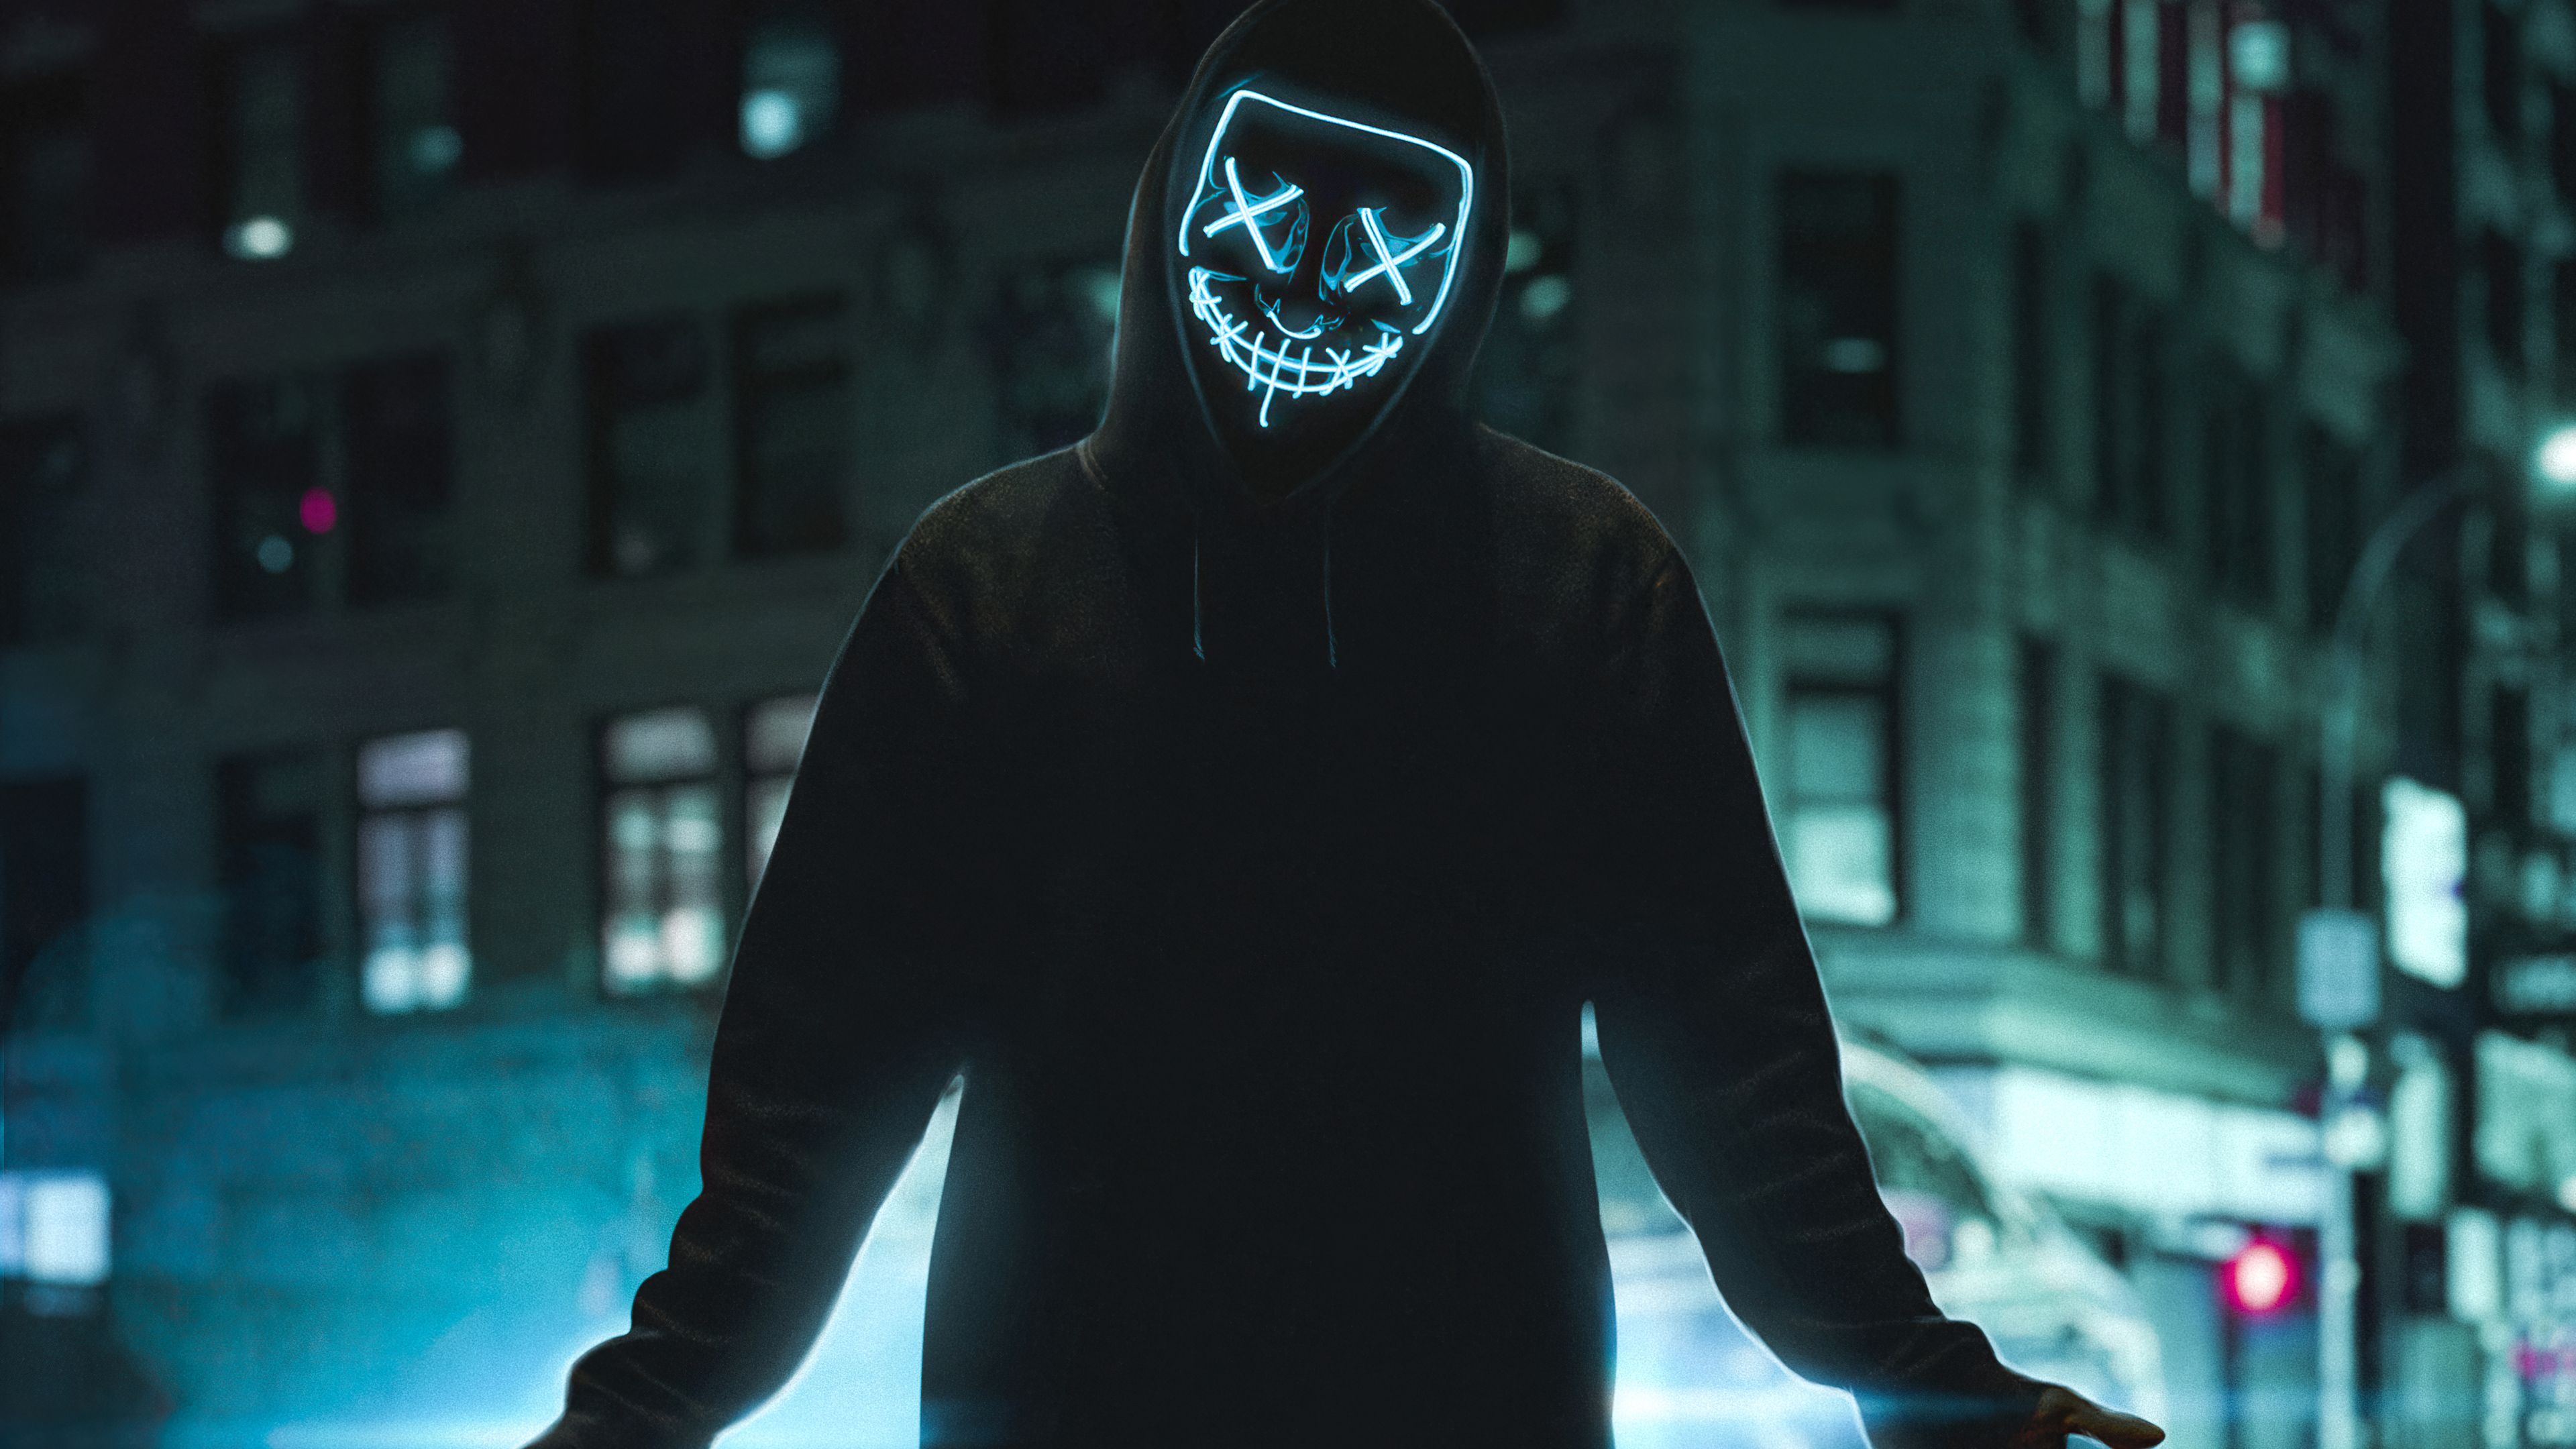 Neon Mask Guy Street 4k Macbook Pro Retina HD 4k Wallpaper, Image, Background, Photo and Picture